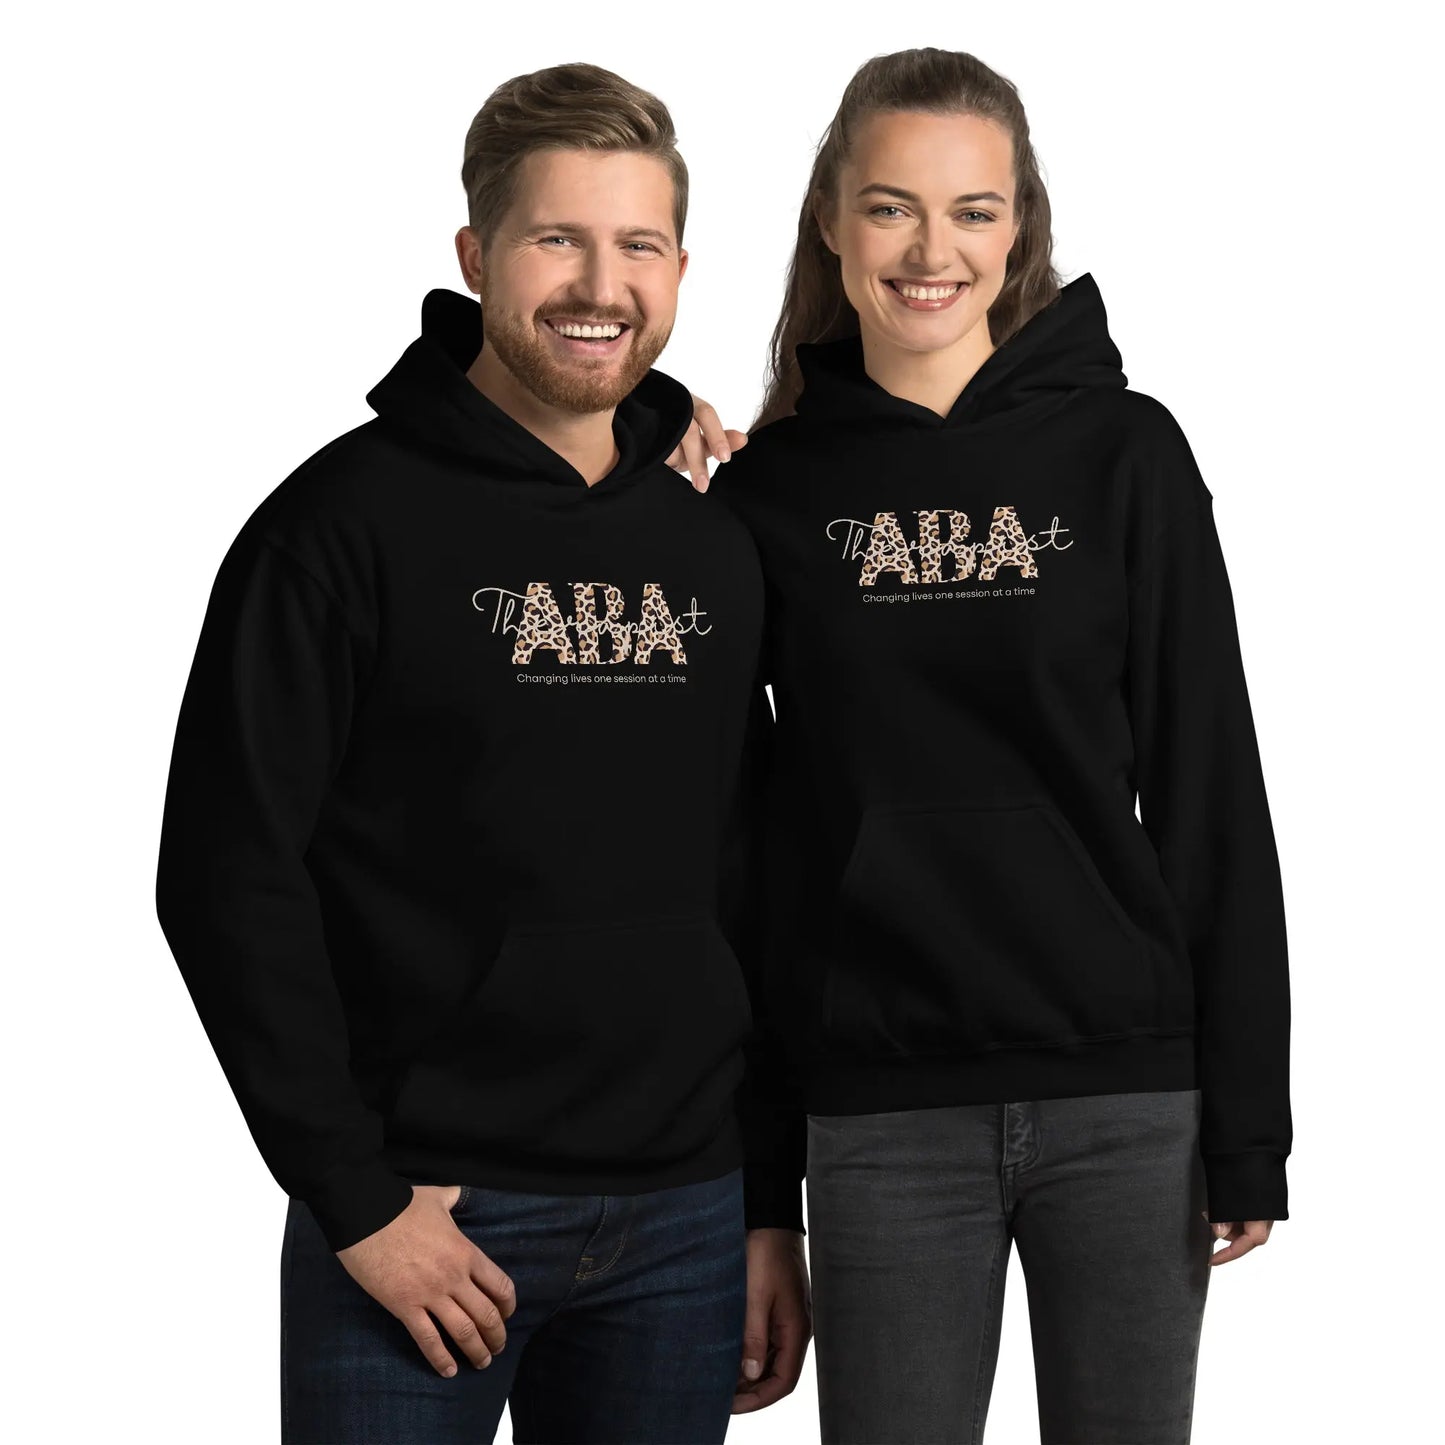 Behavior Therapist Hoodie ABA Therapist Sweater Stay Warm & Stylish in this ABA Therapist Gift Hoodie Making a Difference with Every Session Affordable ABA Materials